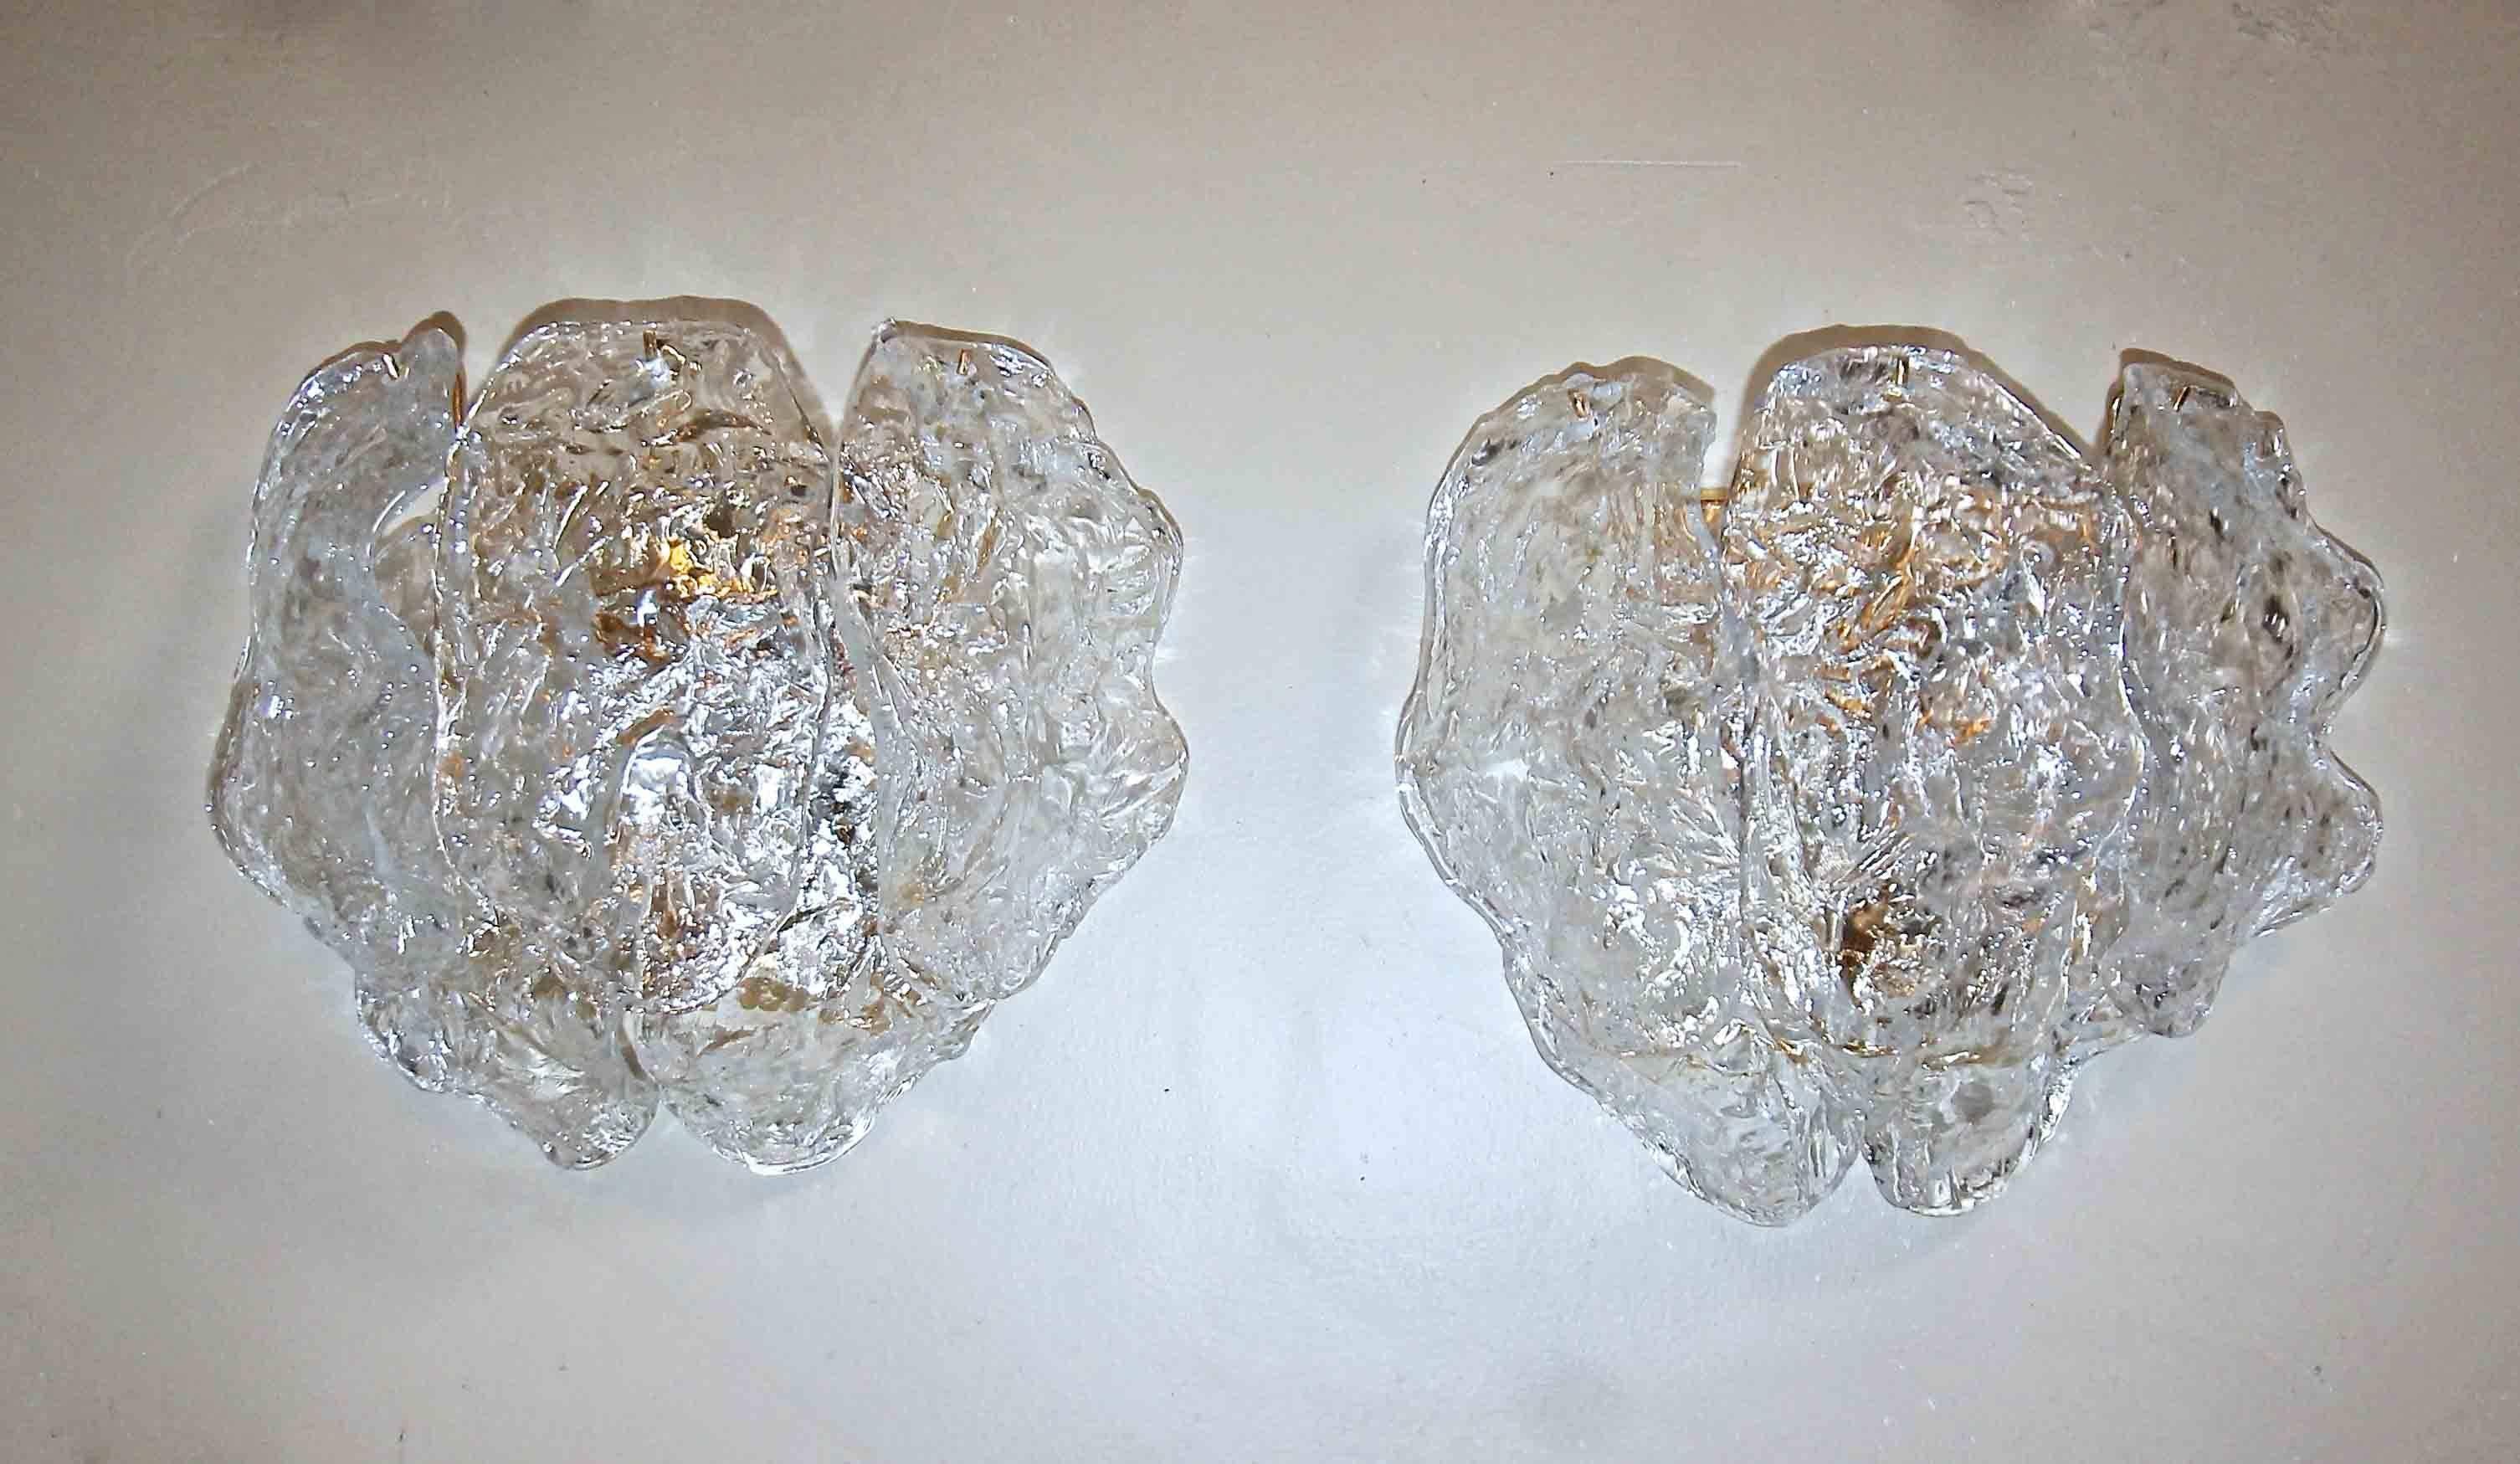 Pair of Italian Murano handblown glass wall sconces with sculpted clear textured panels on brass-plated backplates. Each fixture uses 2 - 40 watt max candelabra base bulbs. Newly wired.